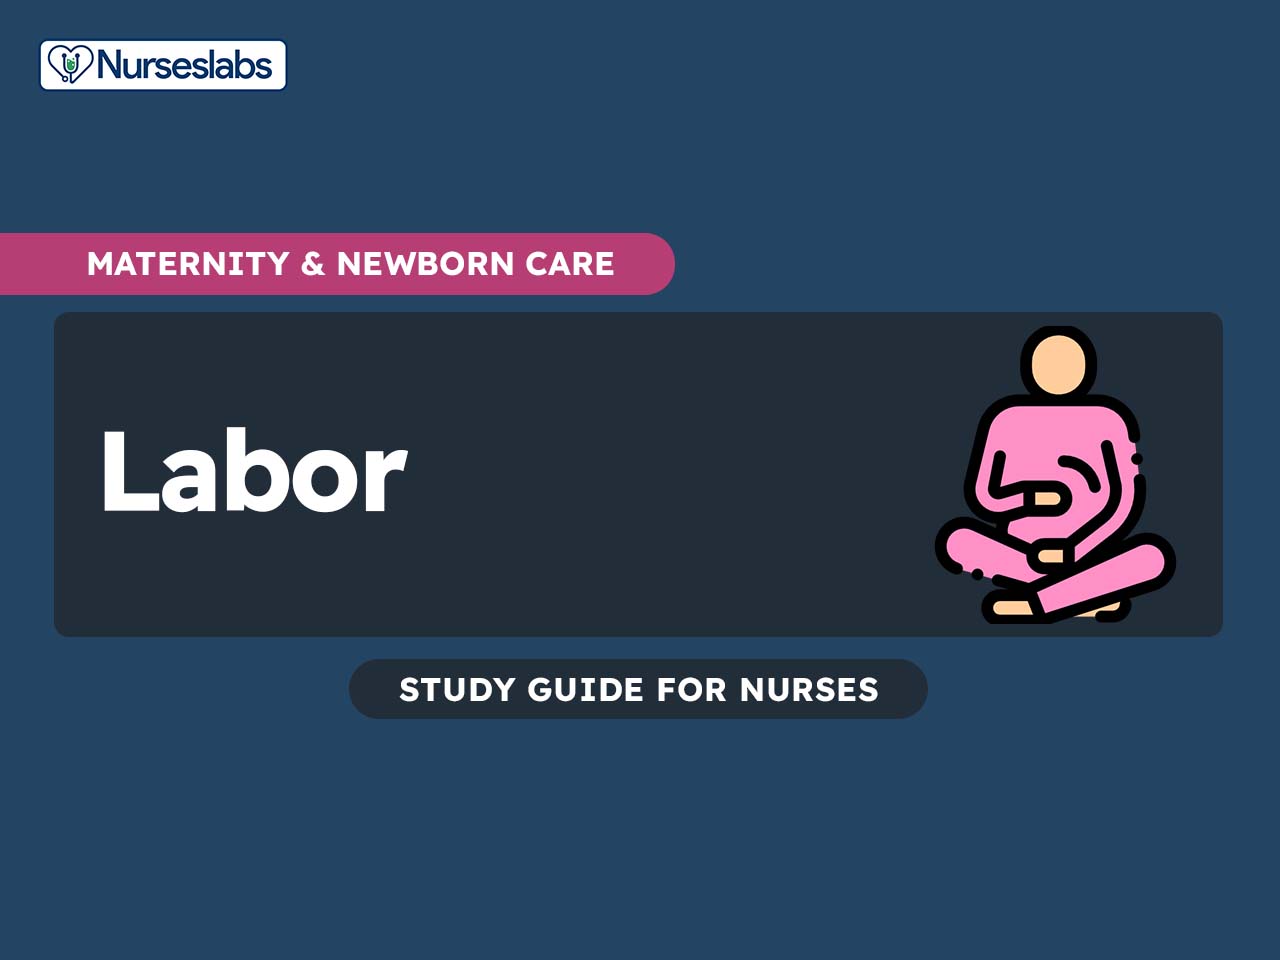 12 Ways You Can Prepare for Labor - Preparing for Childbirth